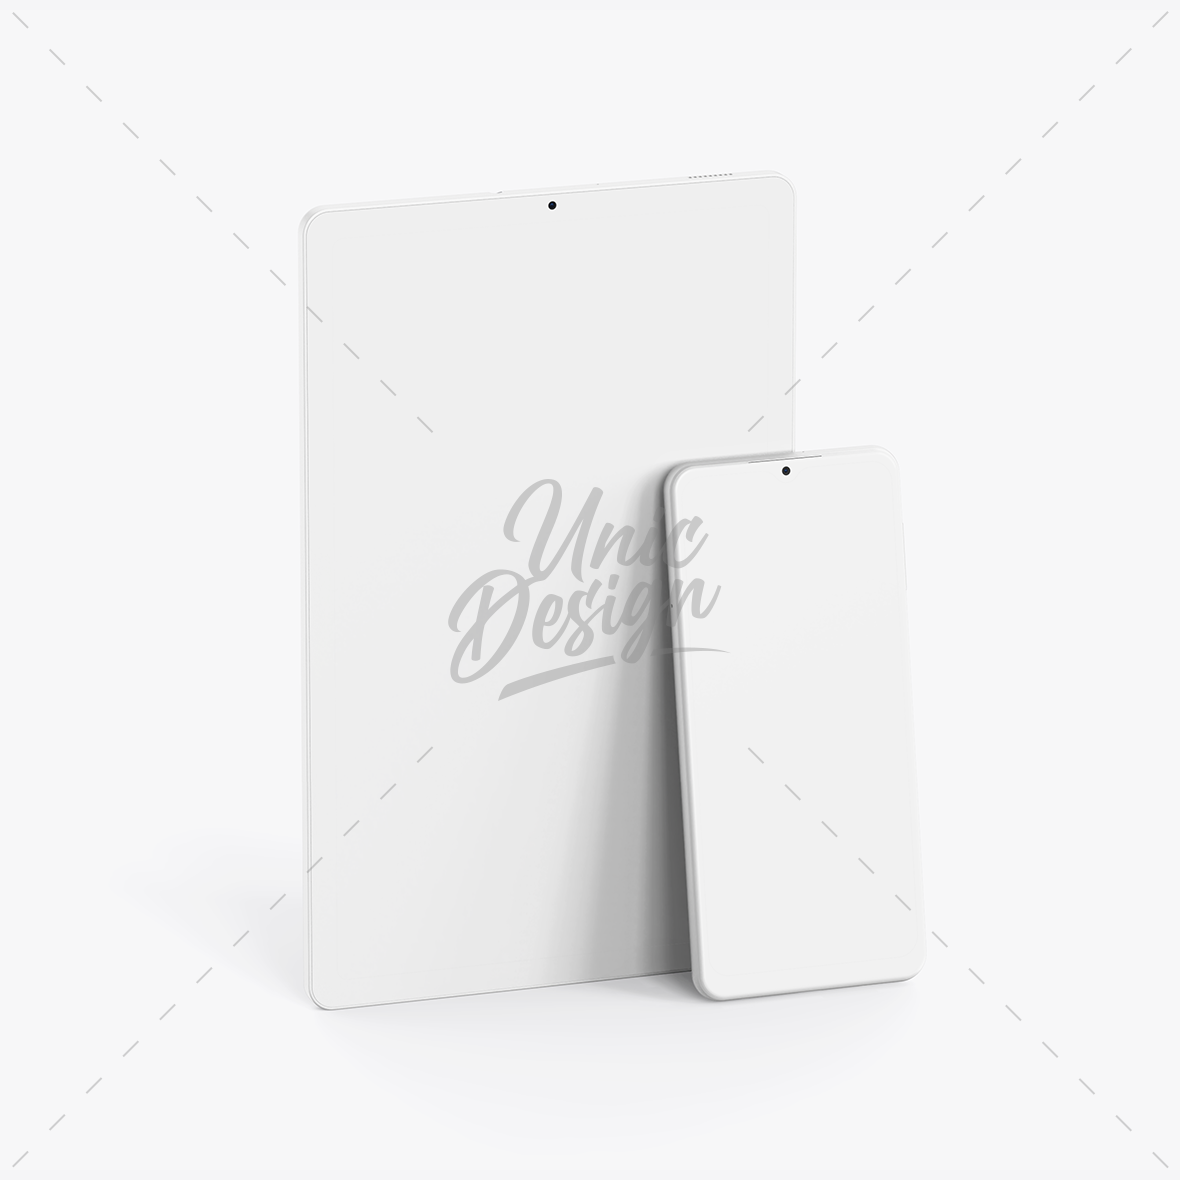 A32 Phone & S6 Tablet Mockup